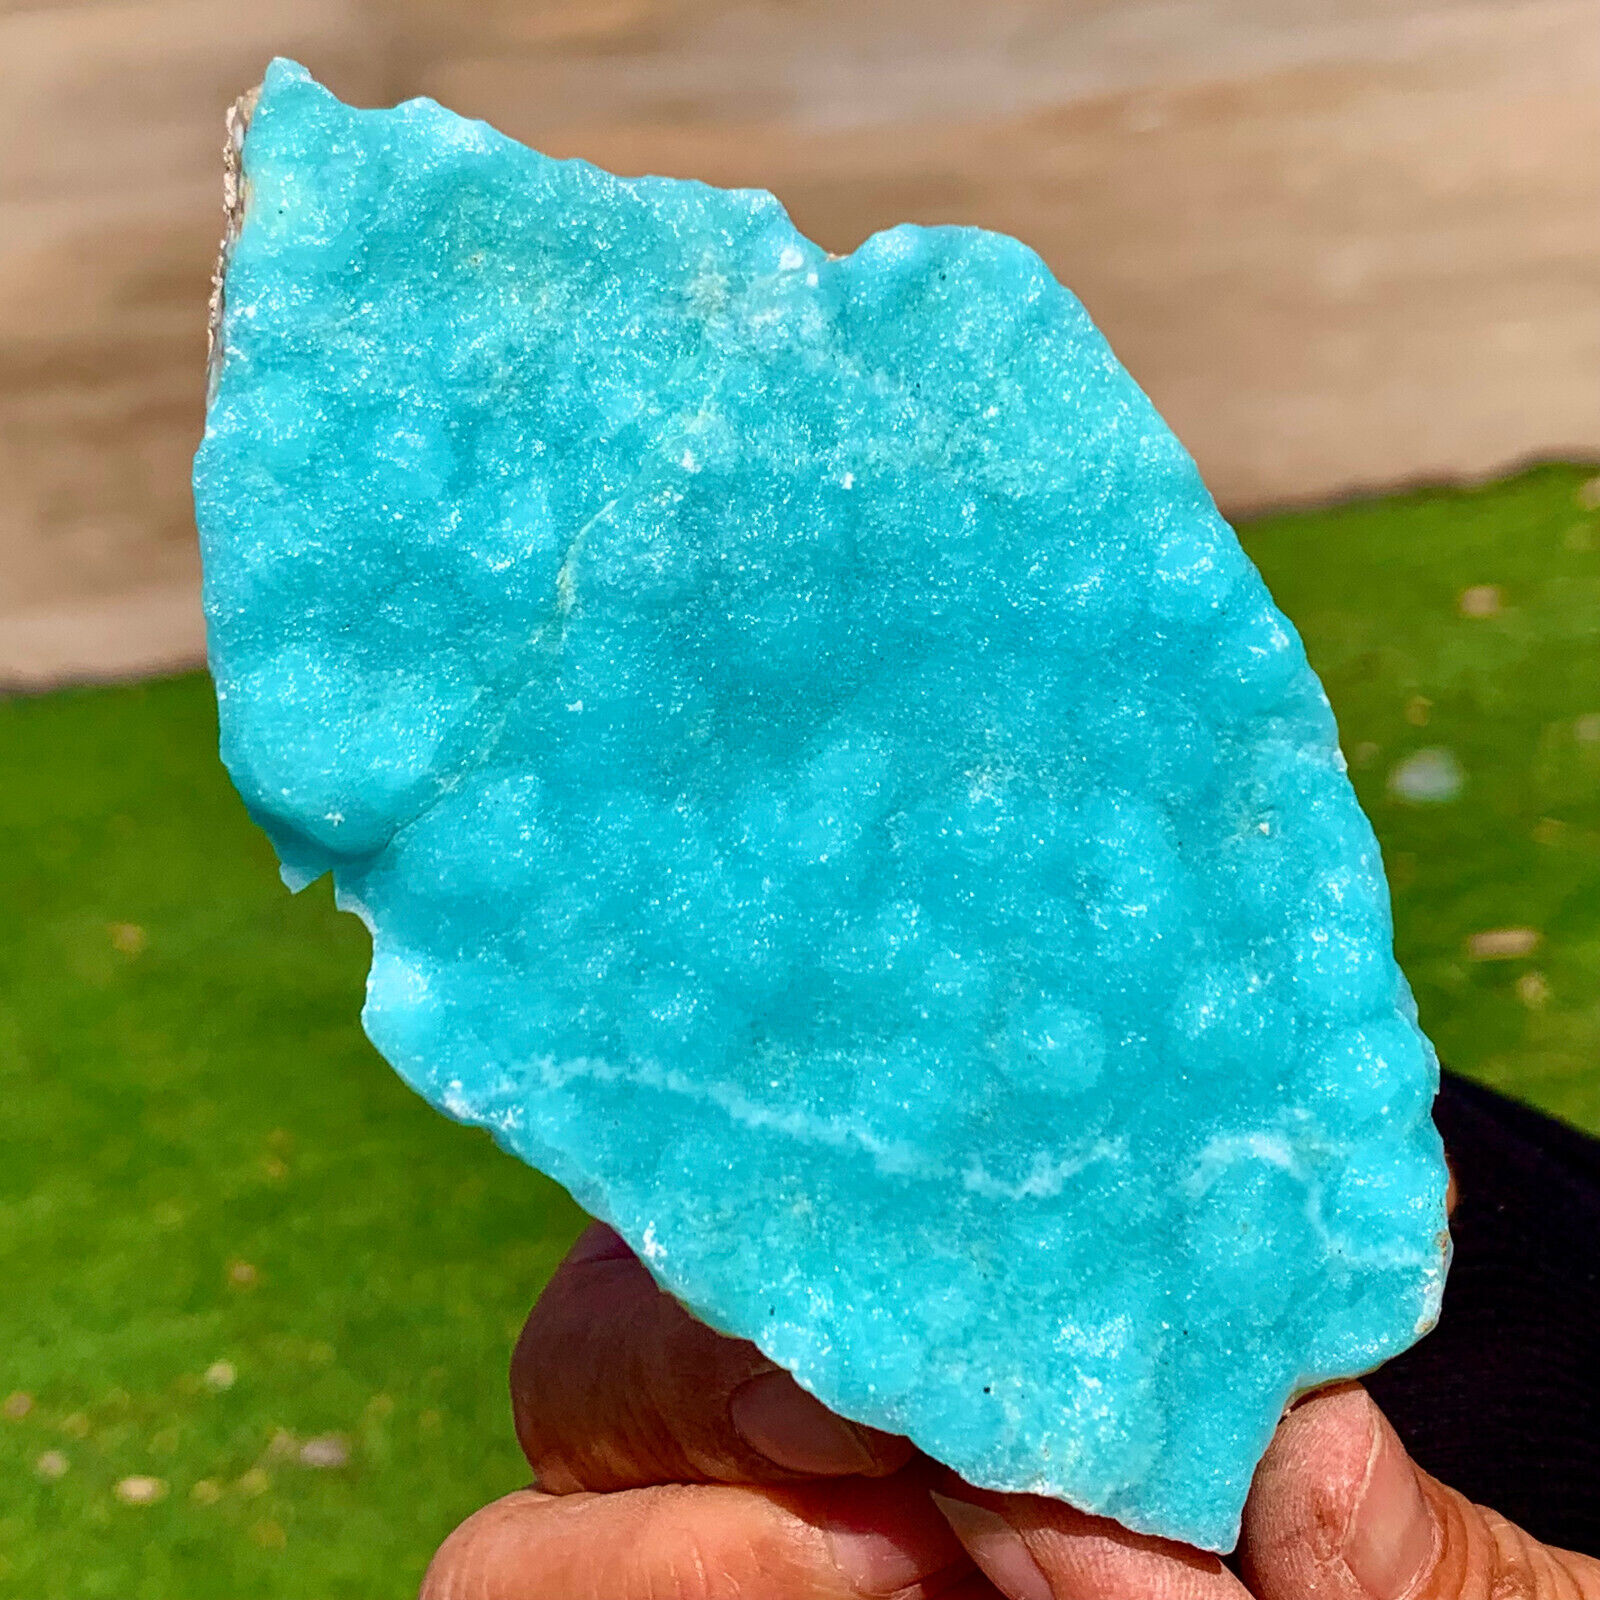 238g Gorgeous Natural larimar rough raw Crystal Mineral Specimen+stand